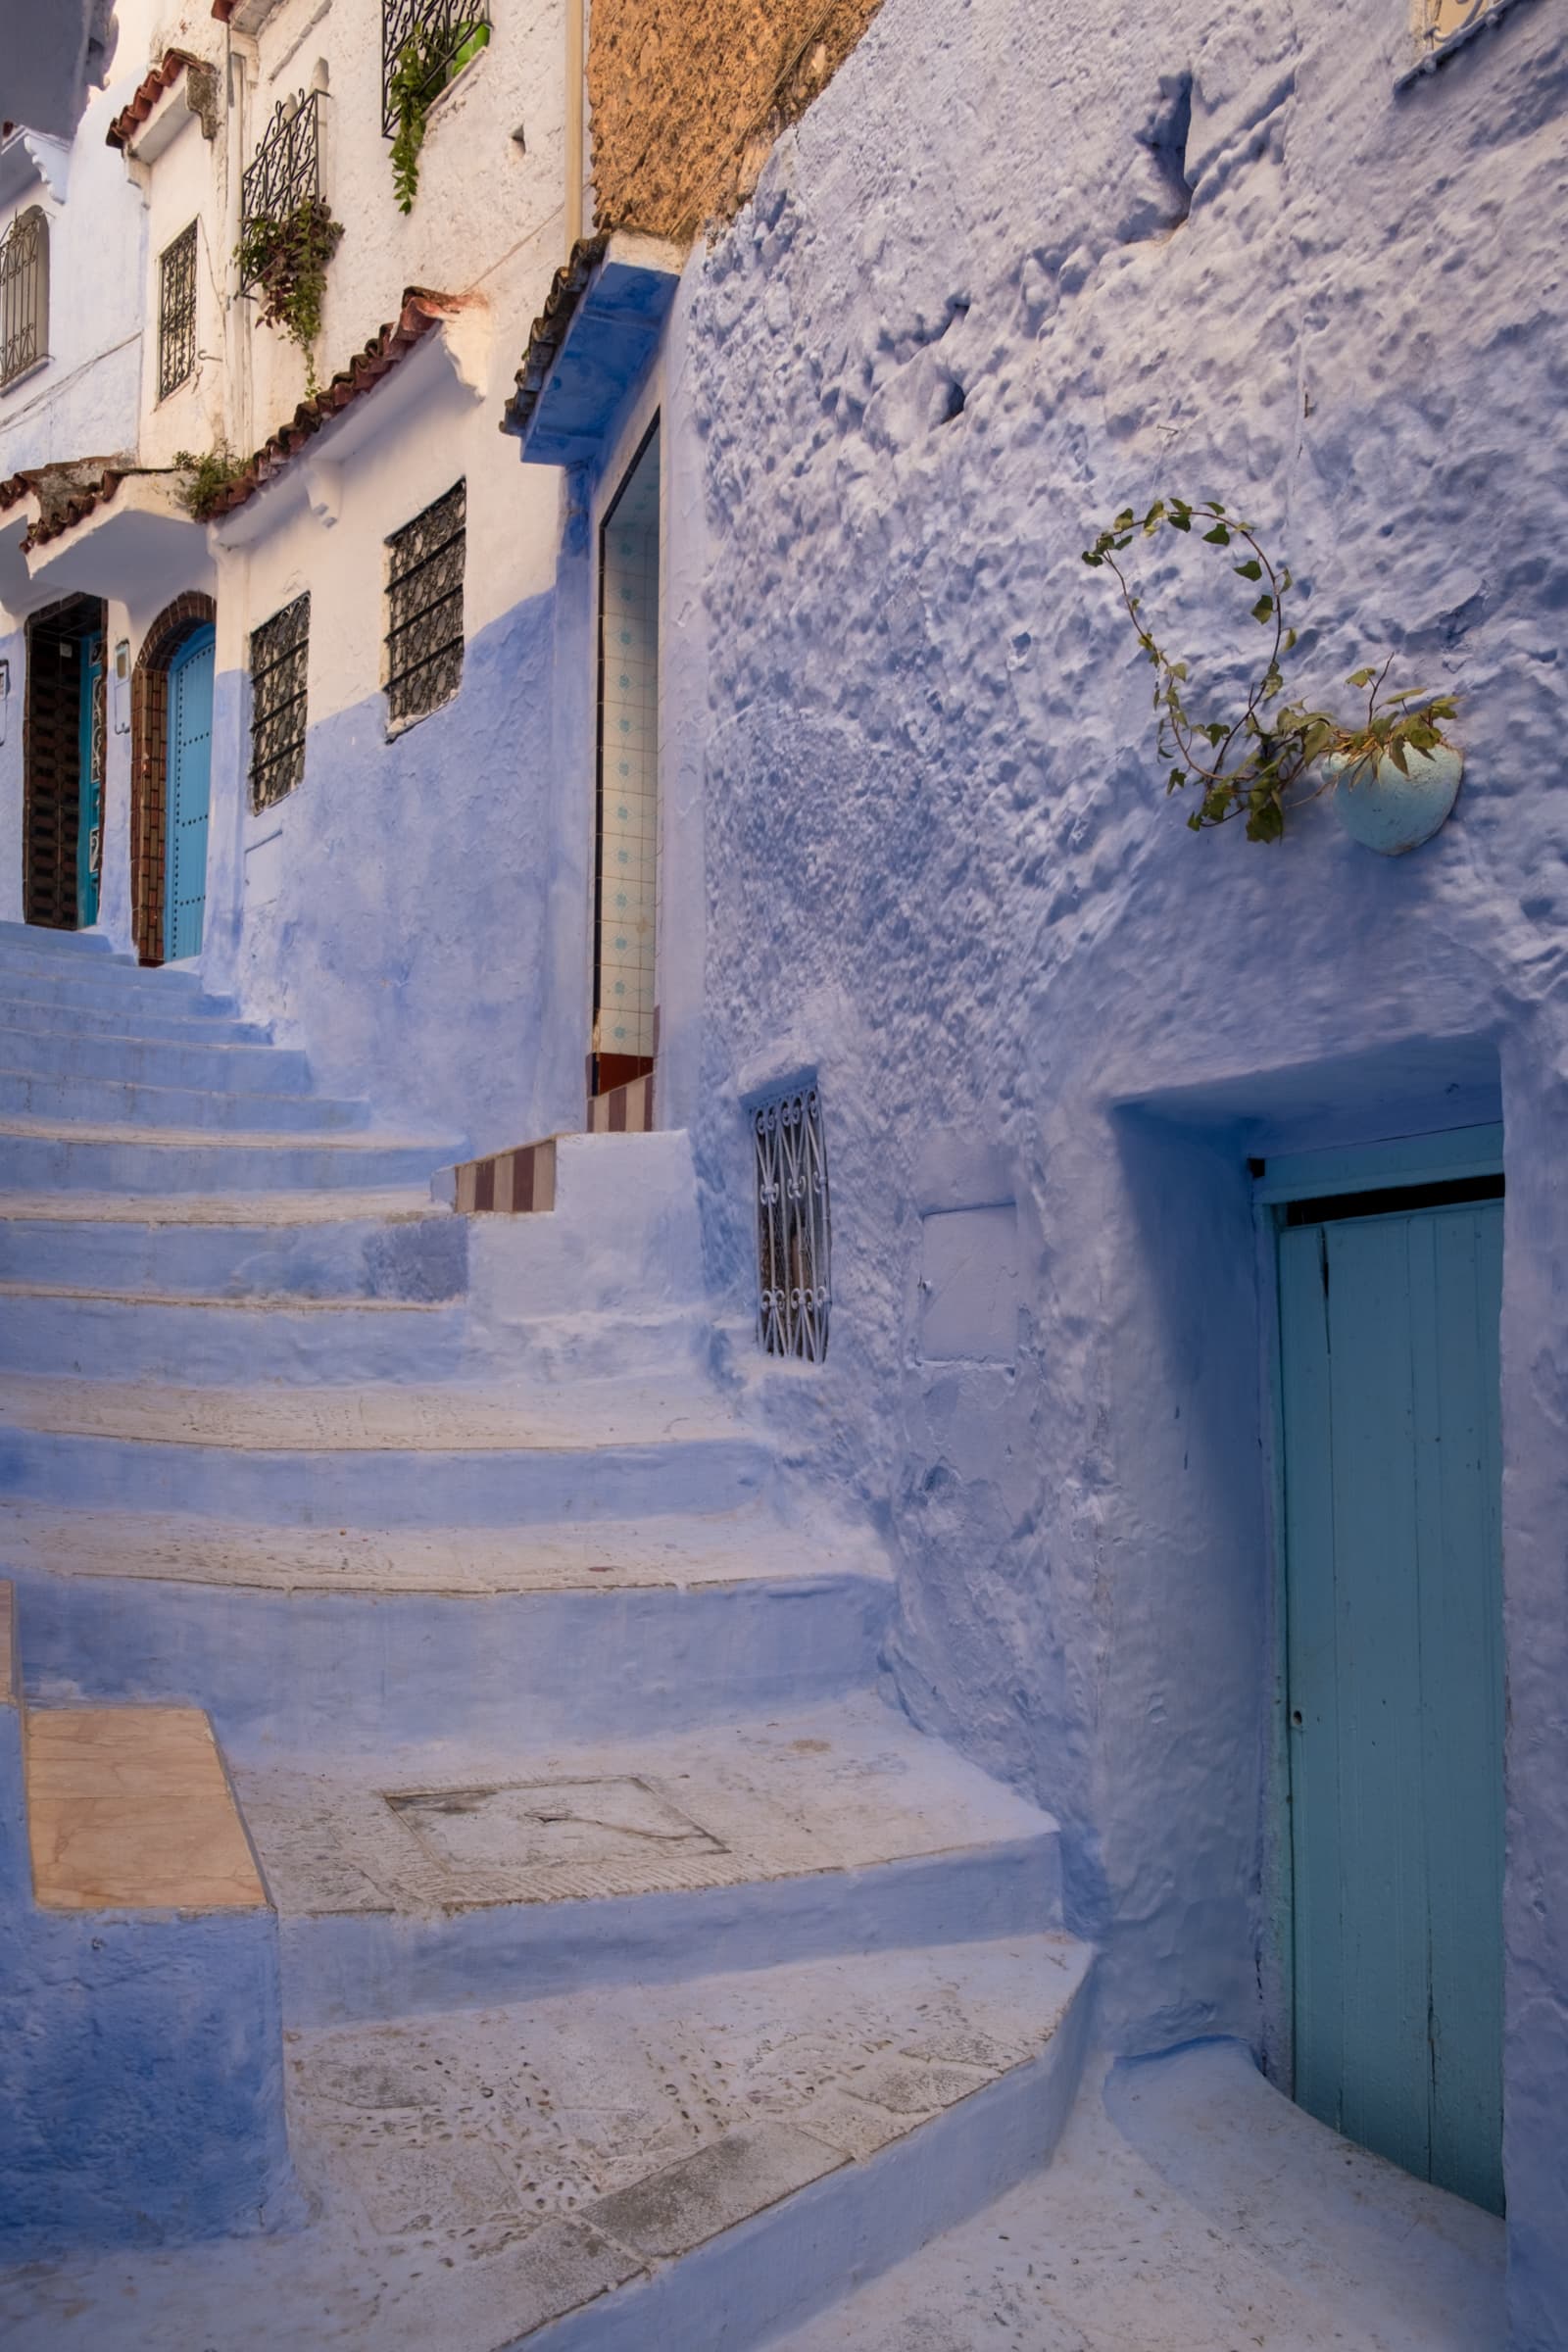 A steep blue side street in Chefchaouen, Morocco